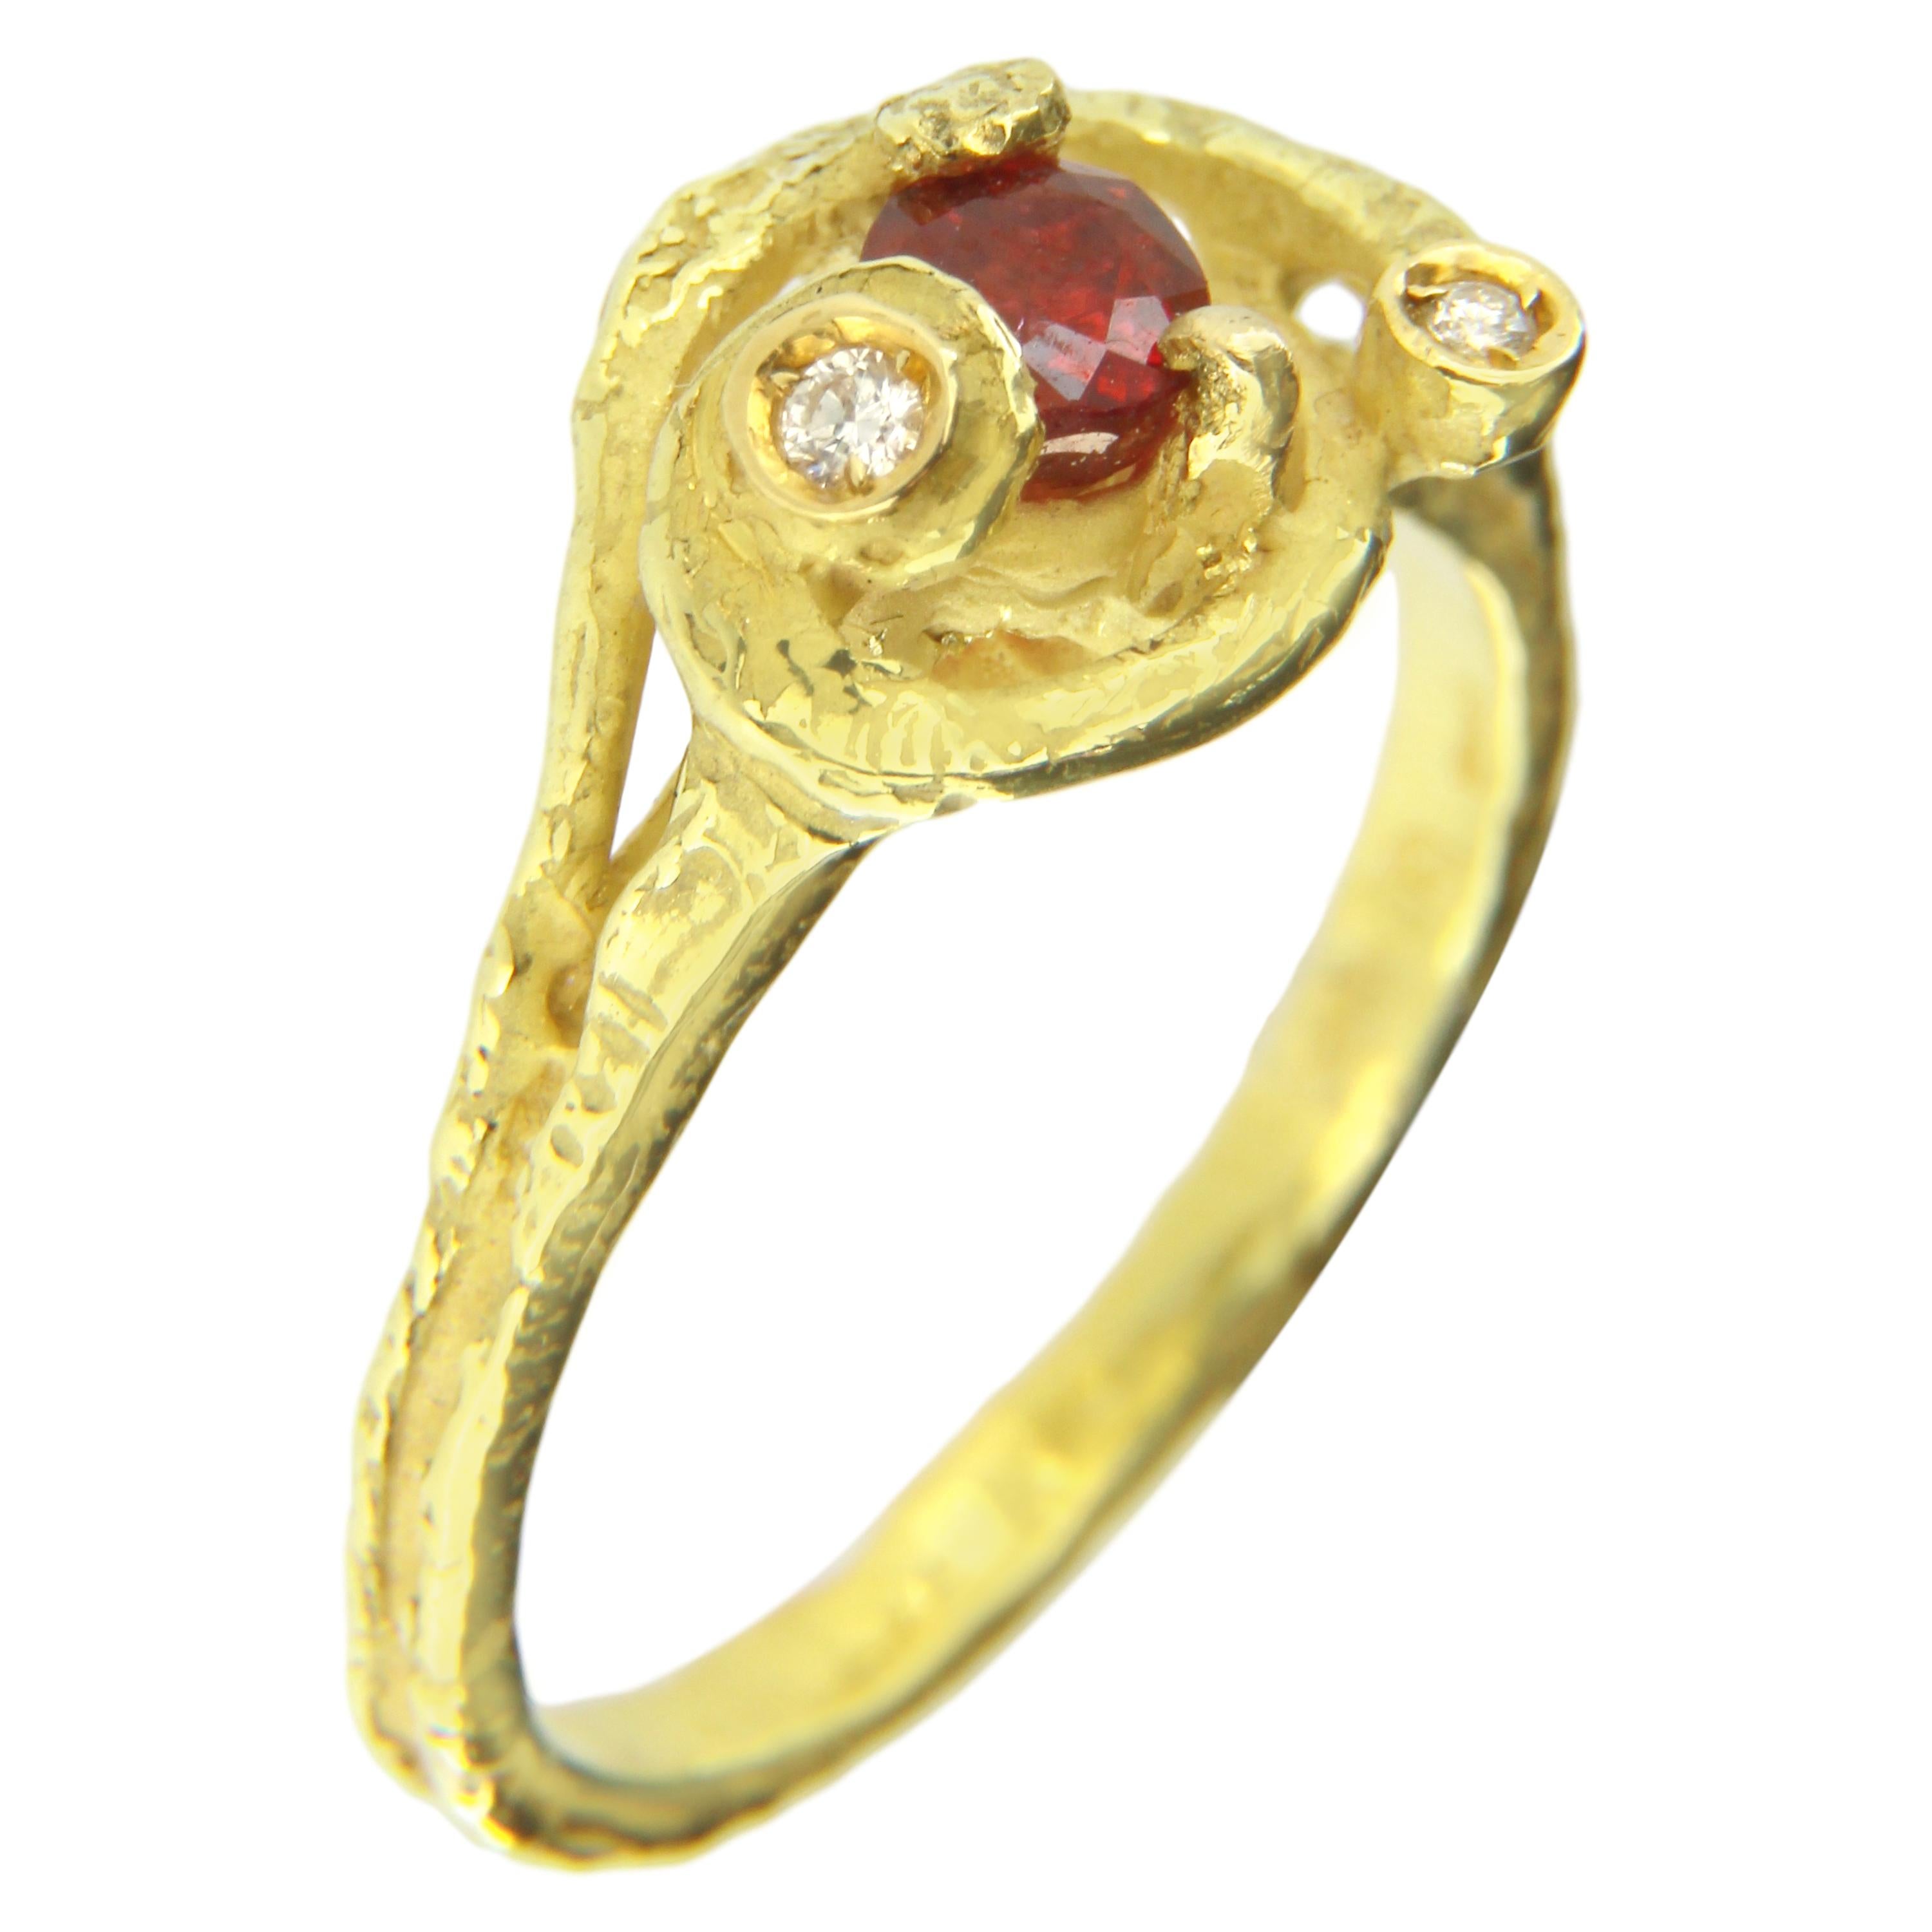 Exquisite Ruby and Diamonds Gemstone Satin Yellow Gold Small Cocktail Ring, from Sacchi's , hand-crafted with lost-wax casting technique.

Lost-wax casting, one of the oldest techniques for creating jewelry, forms the basis of Sacchi's jewelry